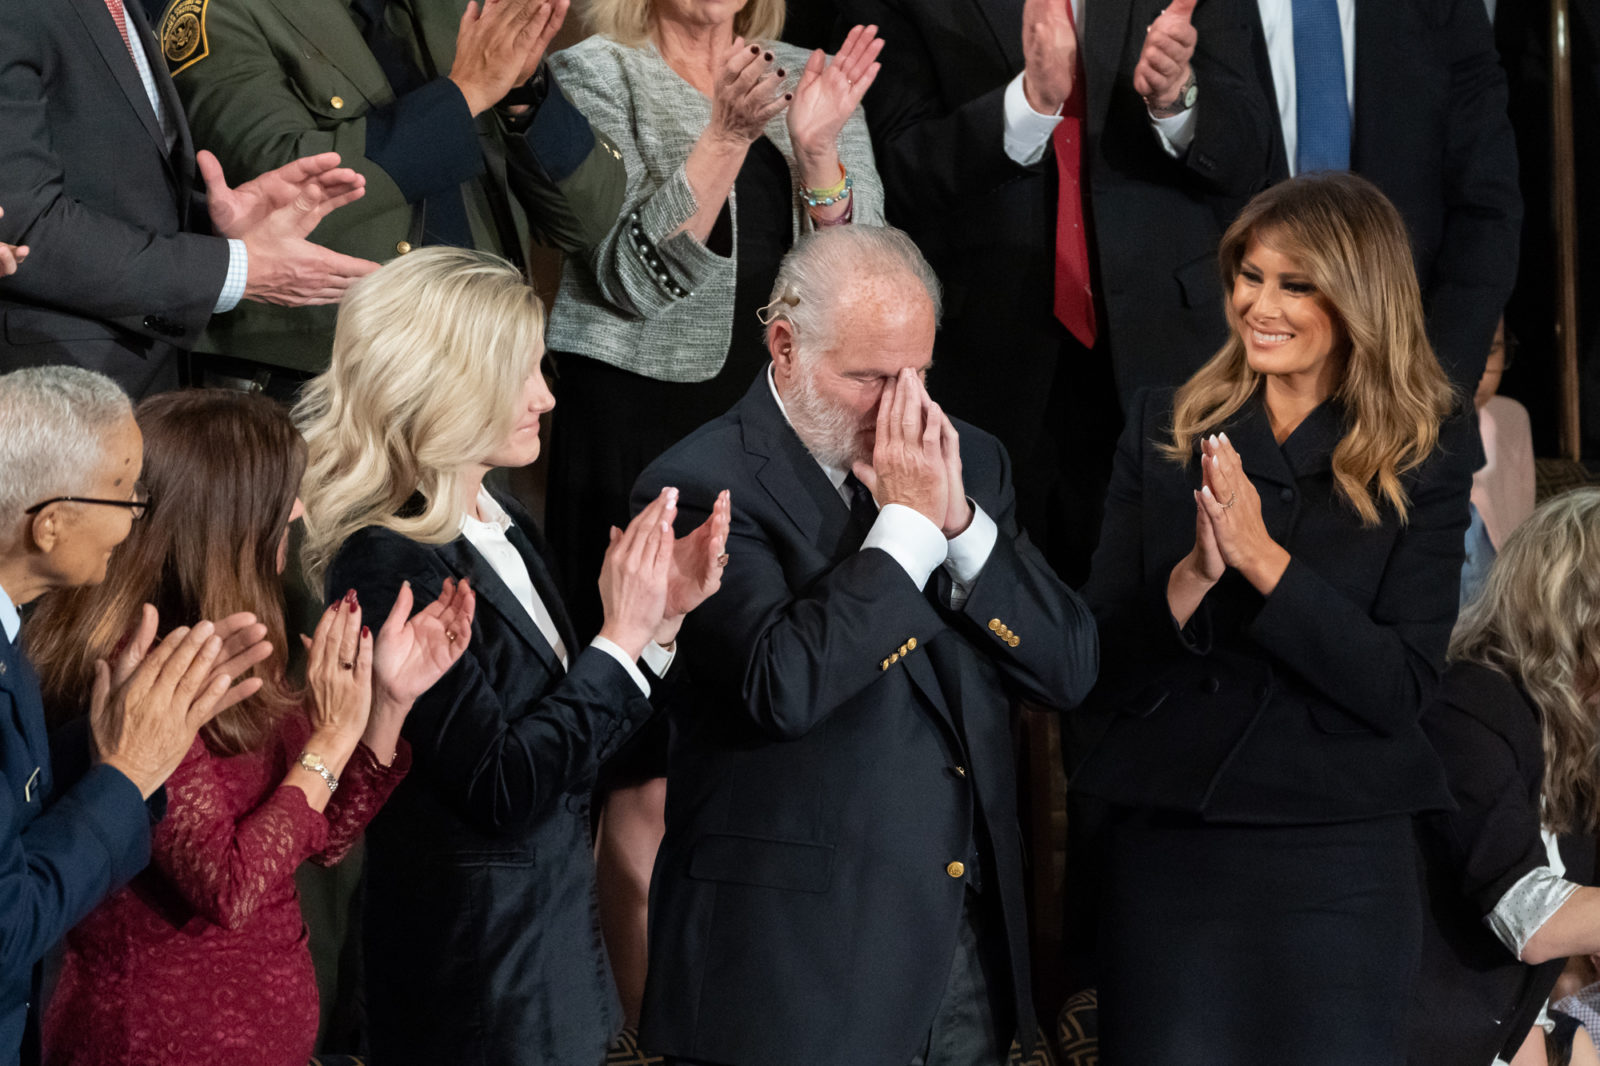 First Lady Melania Trump applauds as gallery guest Rush Limbaugh is recognized by President Donald J. Trump during the State of the Union address Tuesday, Feb. 4, 2020, in the House chamber at the U.S. Capitol in Washington, D.C. Limbaugh received the Presidential Medal of Freedom during the address.